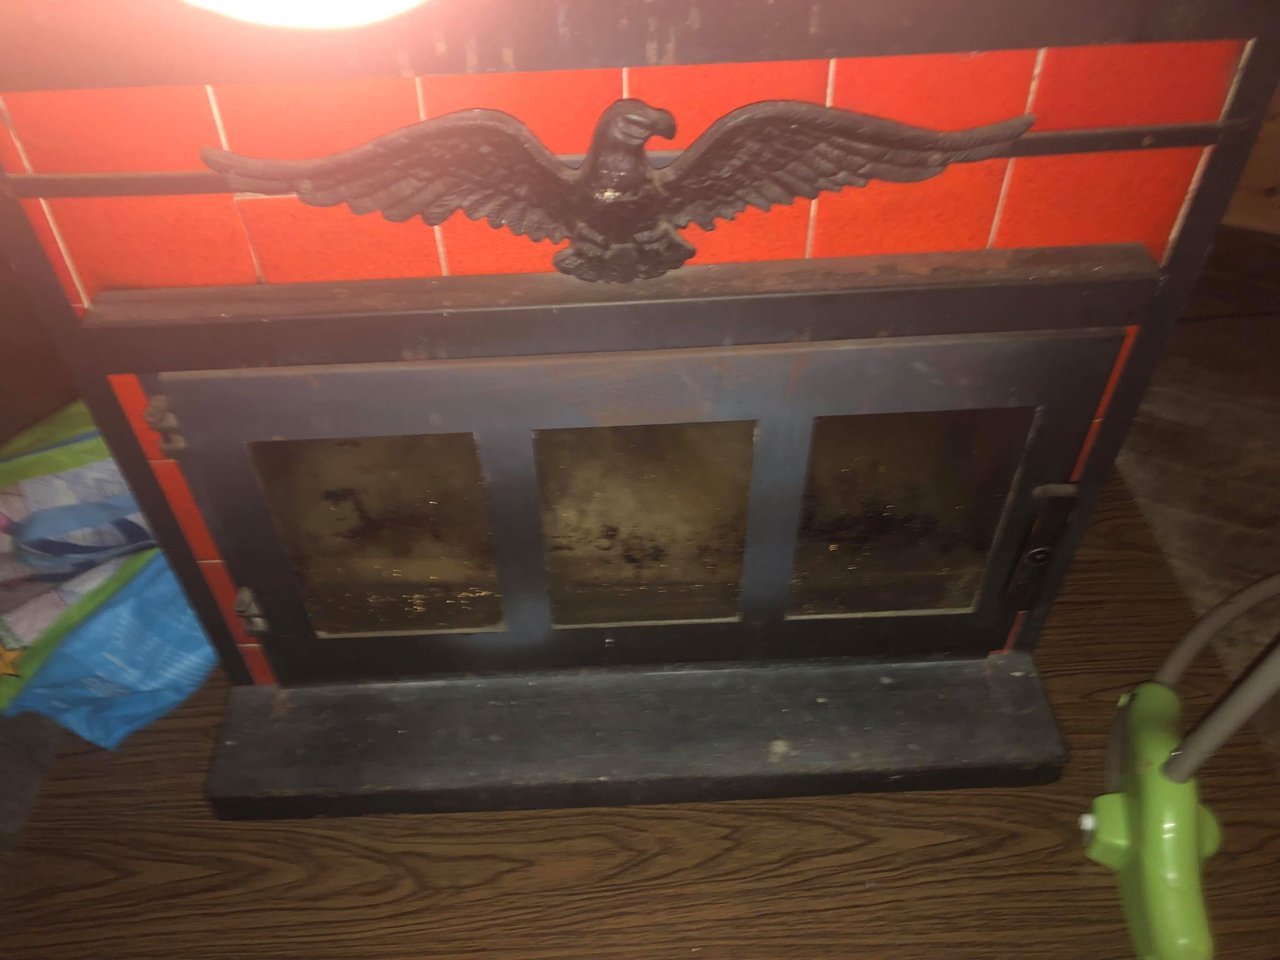 Trying to identify this stove